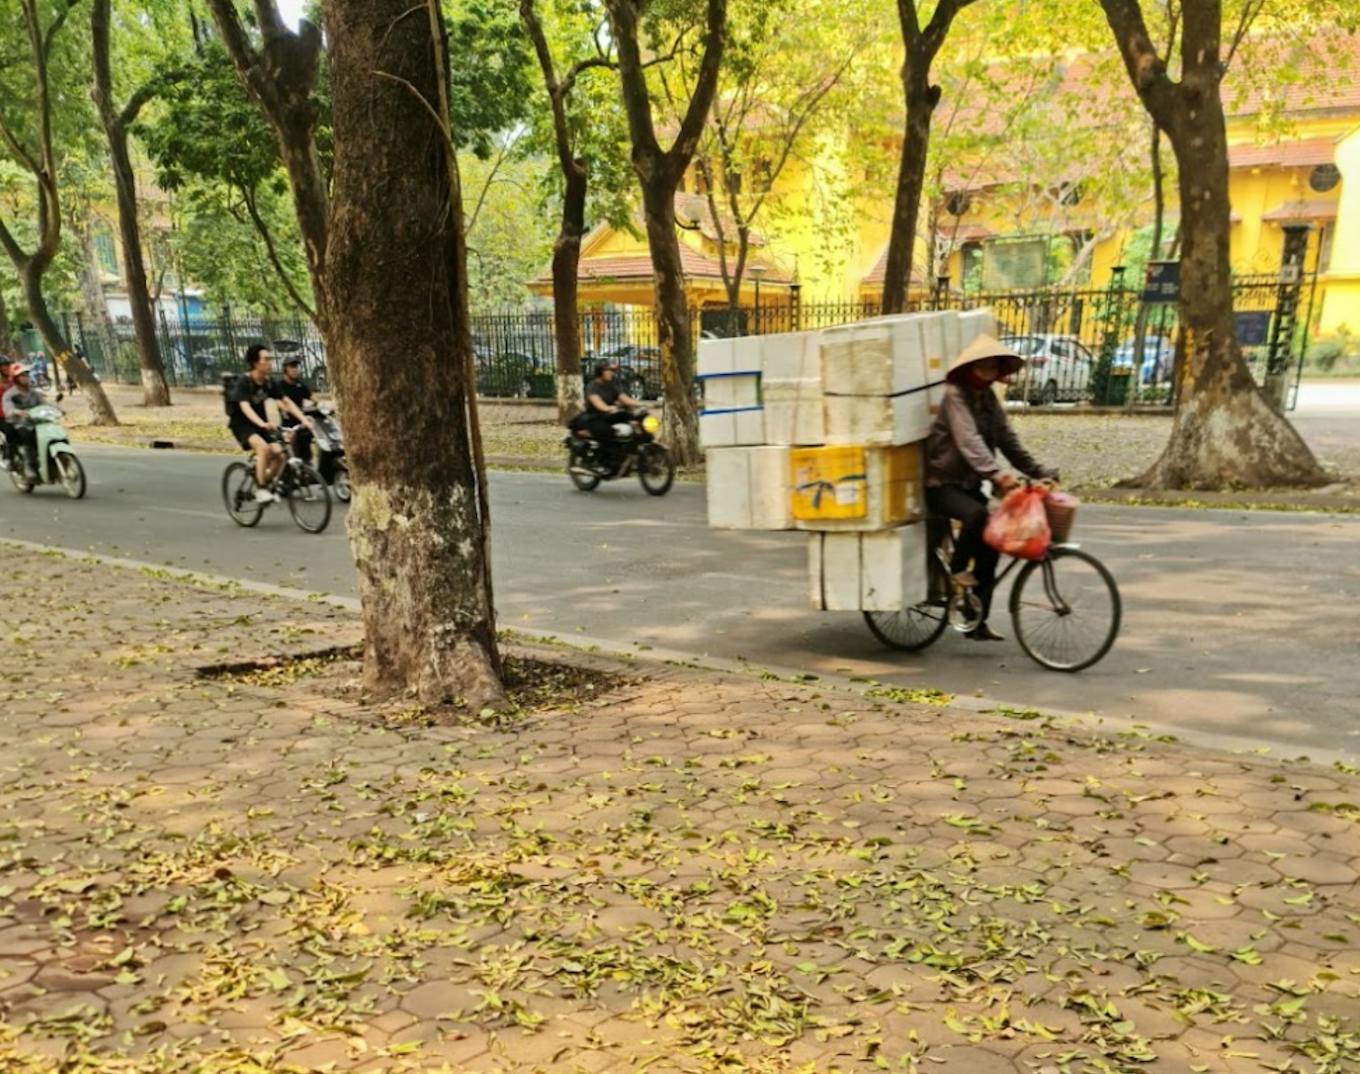 A waste worker cruises down a Hanoi street on her bicycle